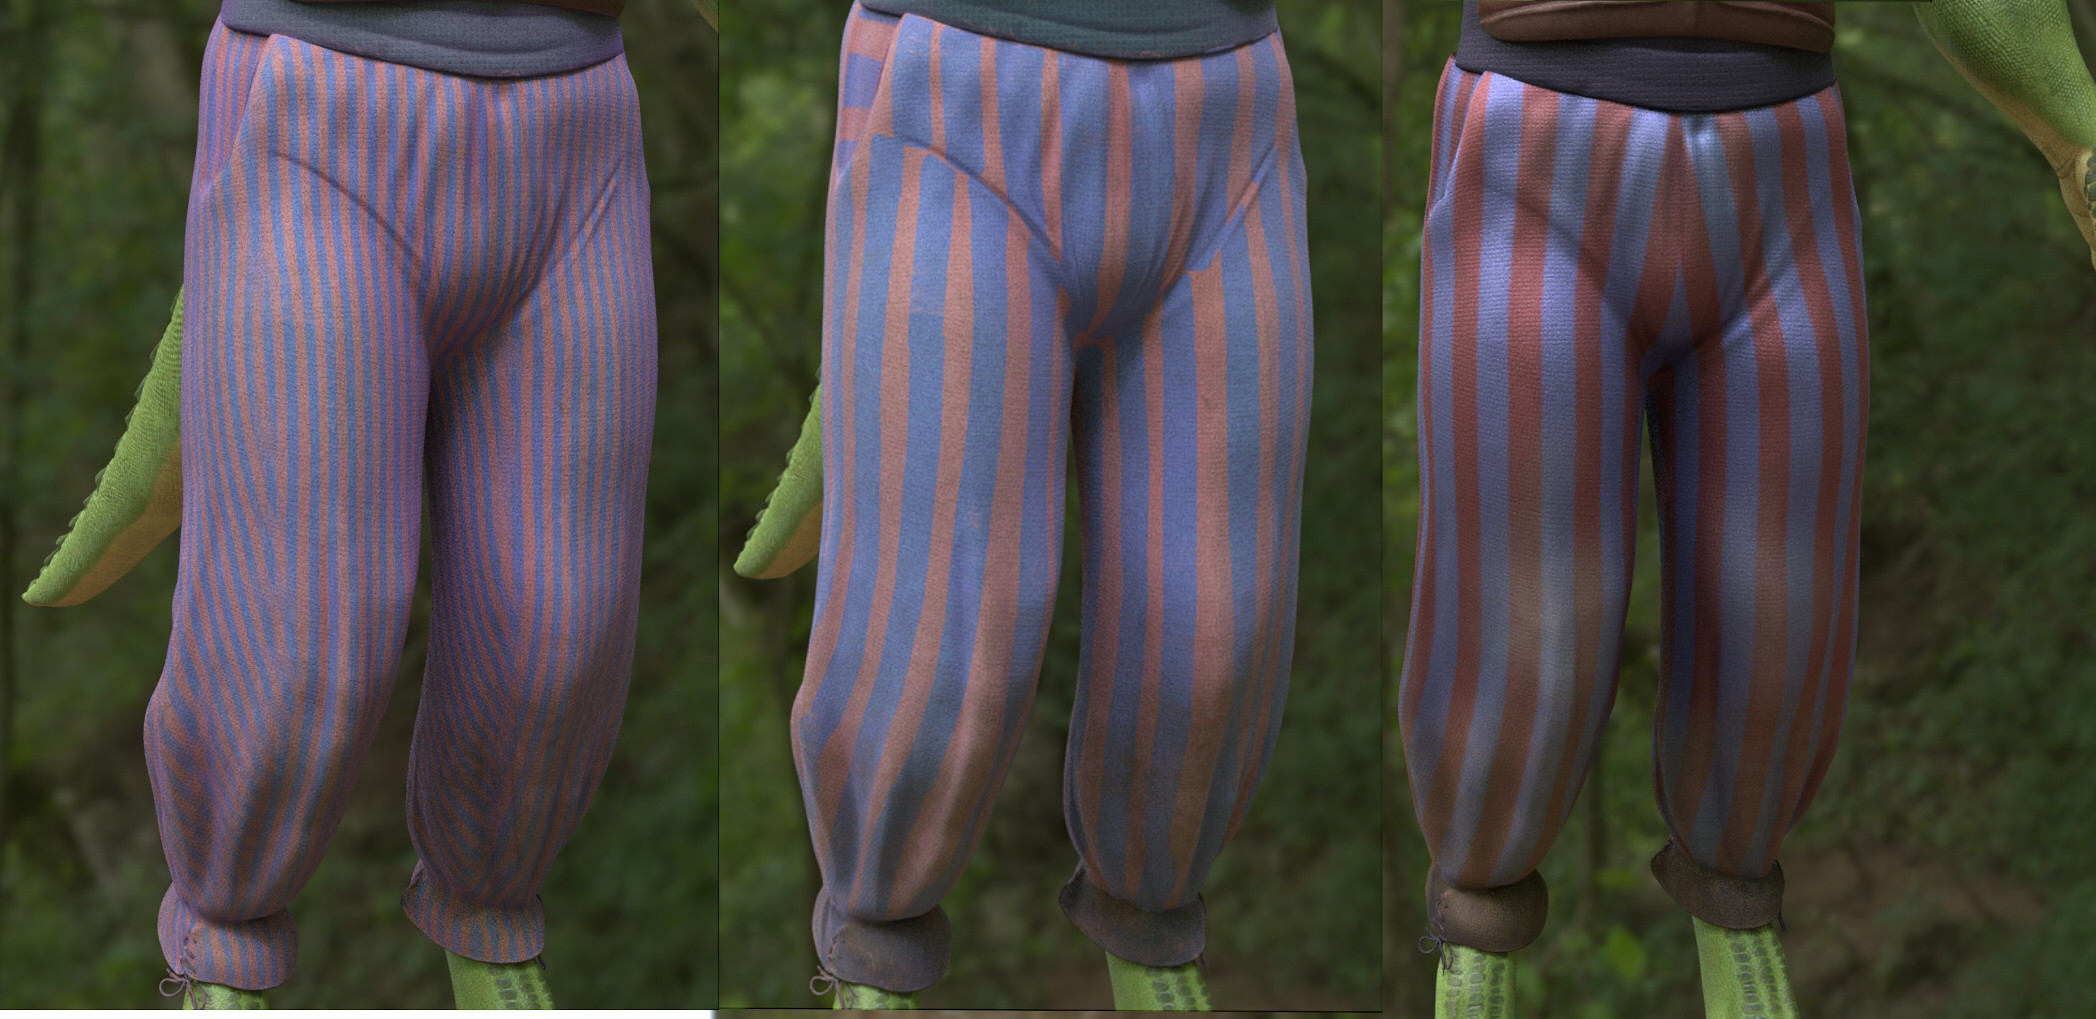 When I could finally begin texturing (my favorite part!), I experimented a lot with the pants before finally settling on a silky, slightly dirty look to sell the idea that he's a traveling performer who lives his life on the road.